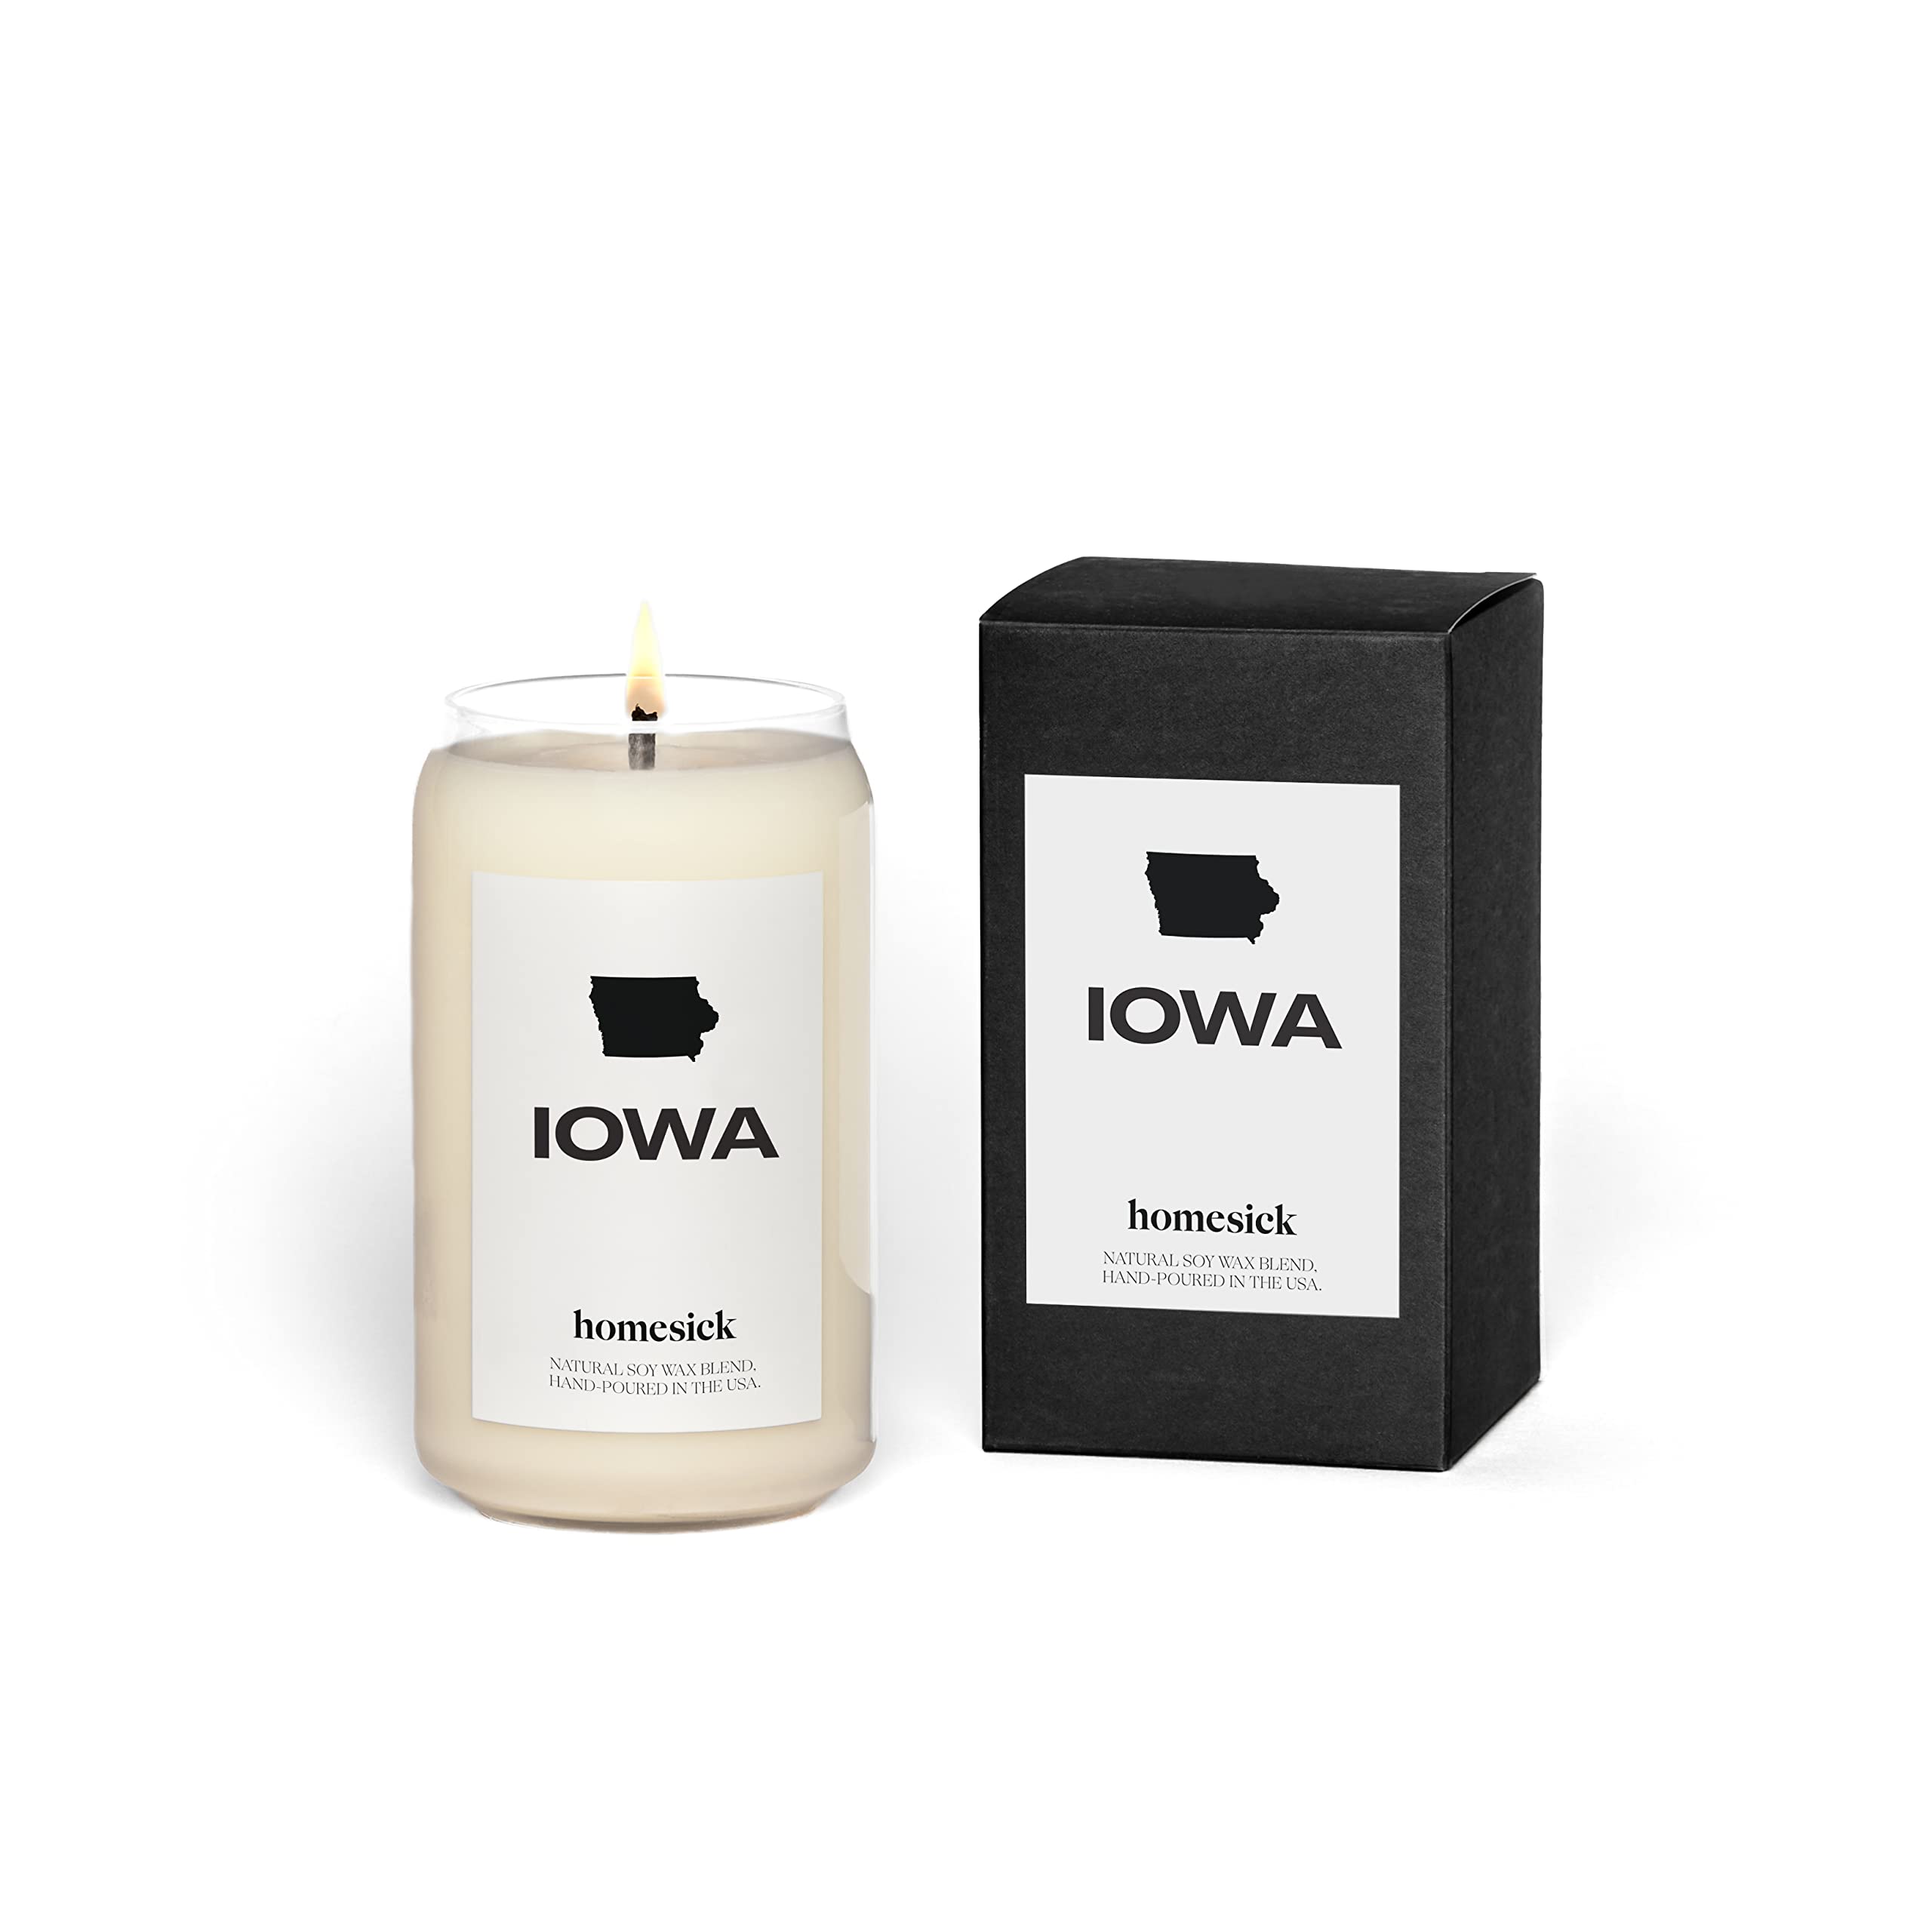 Homesick Premium Scented Candle, Iowa - Scents of Bourbon, Cream, Praline, 13.75 oz, 60-80 Hour Burn, Natural Soy Blend Candle H